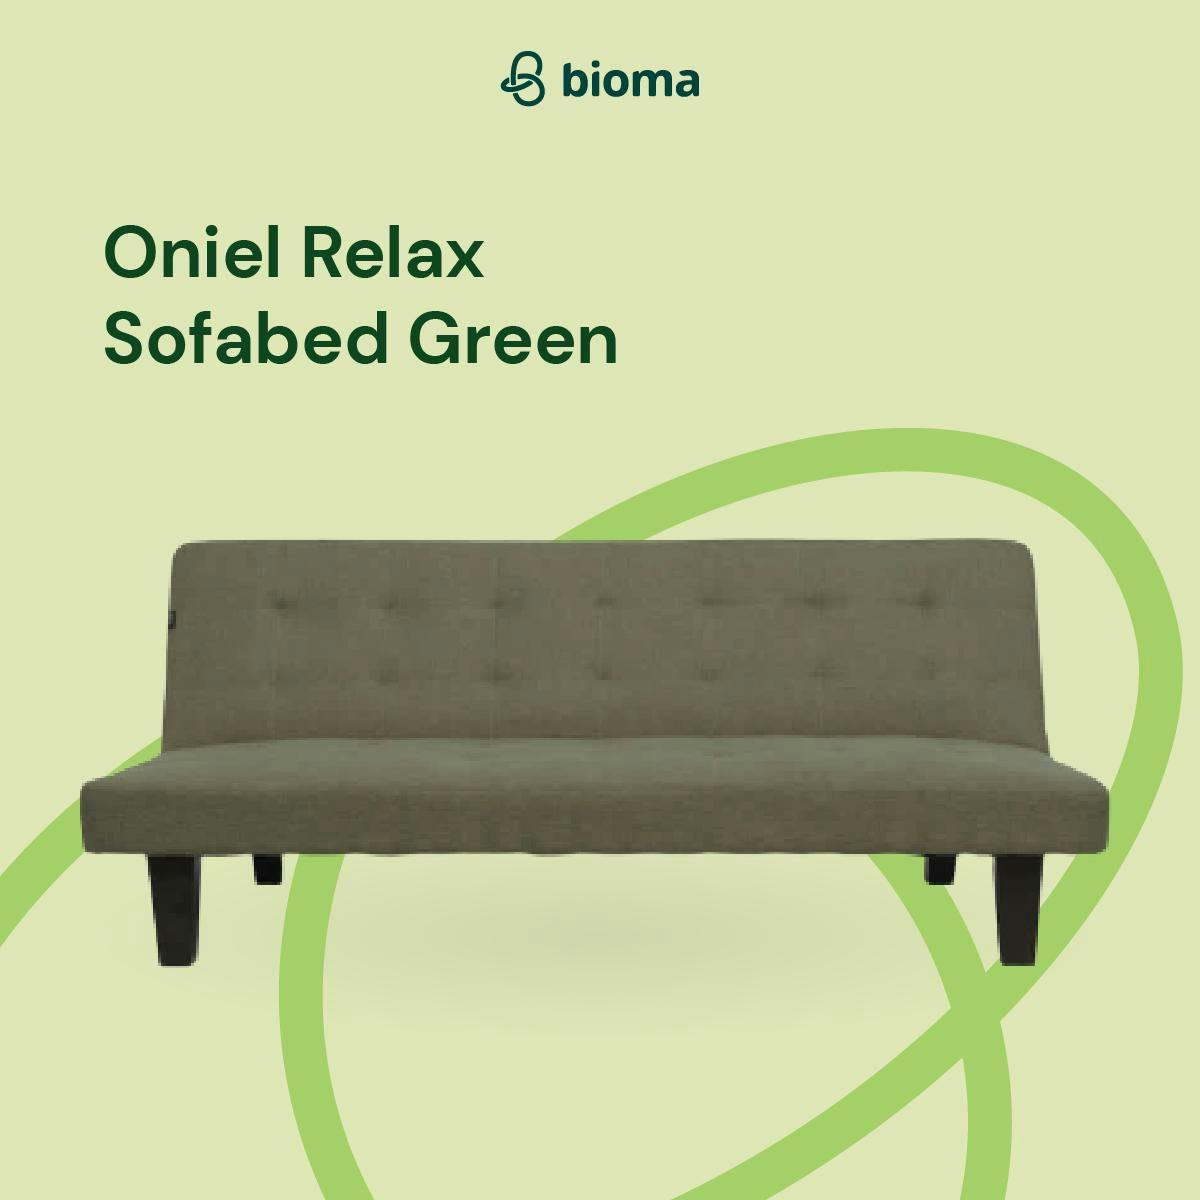 Oniel Relax Sofabed